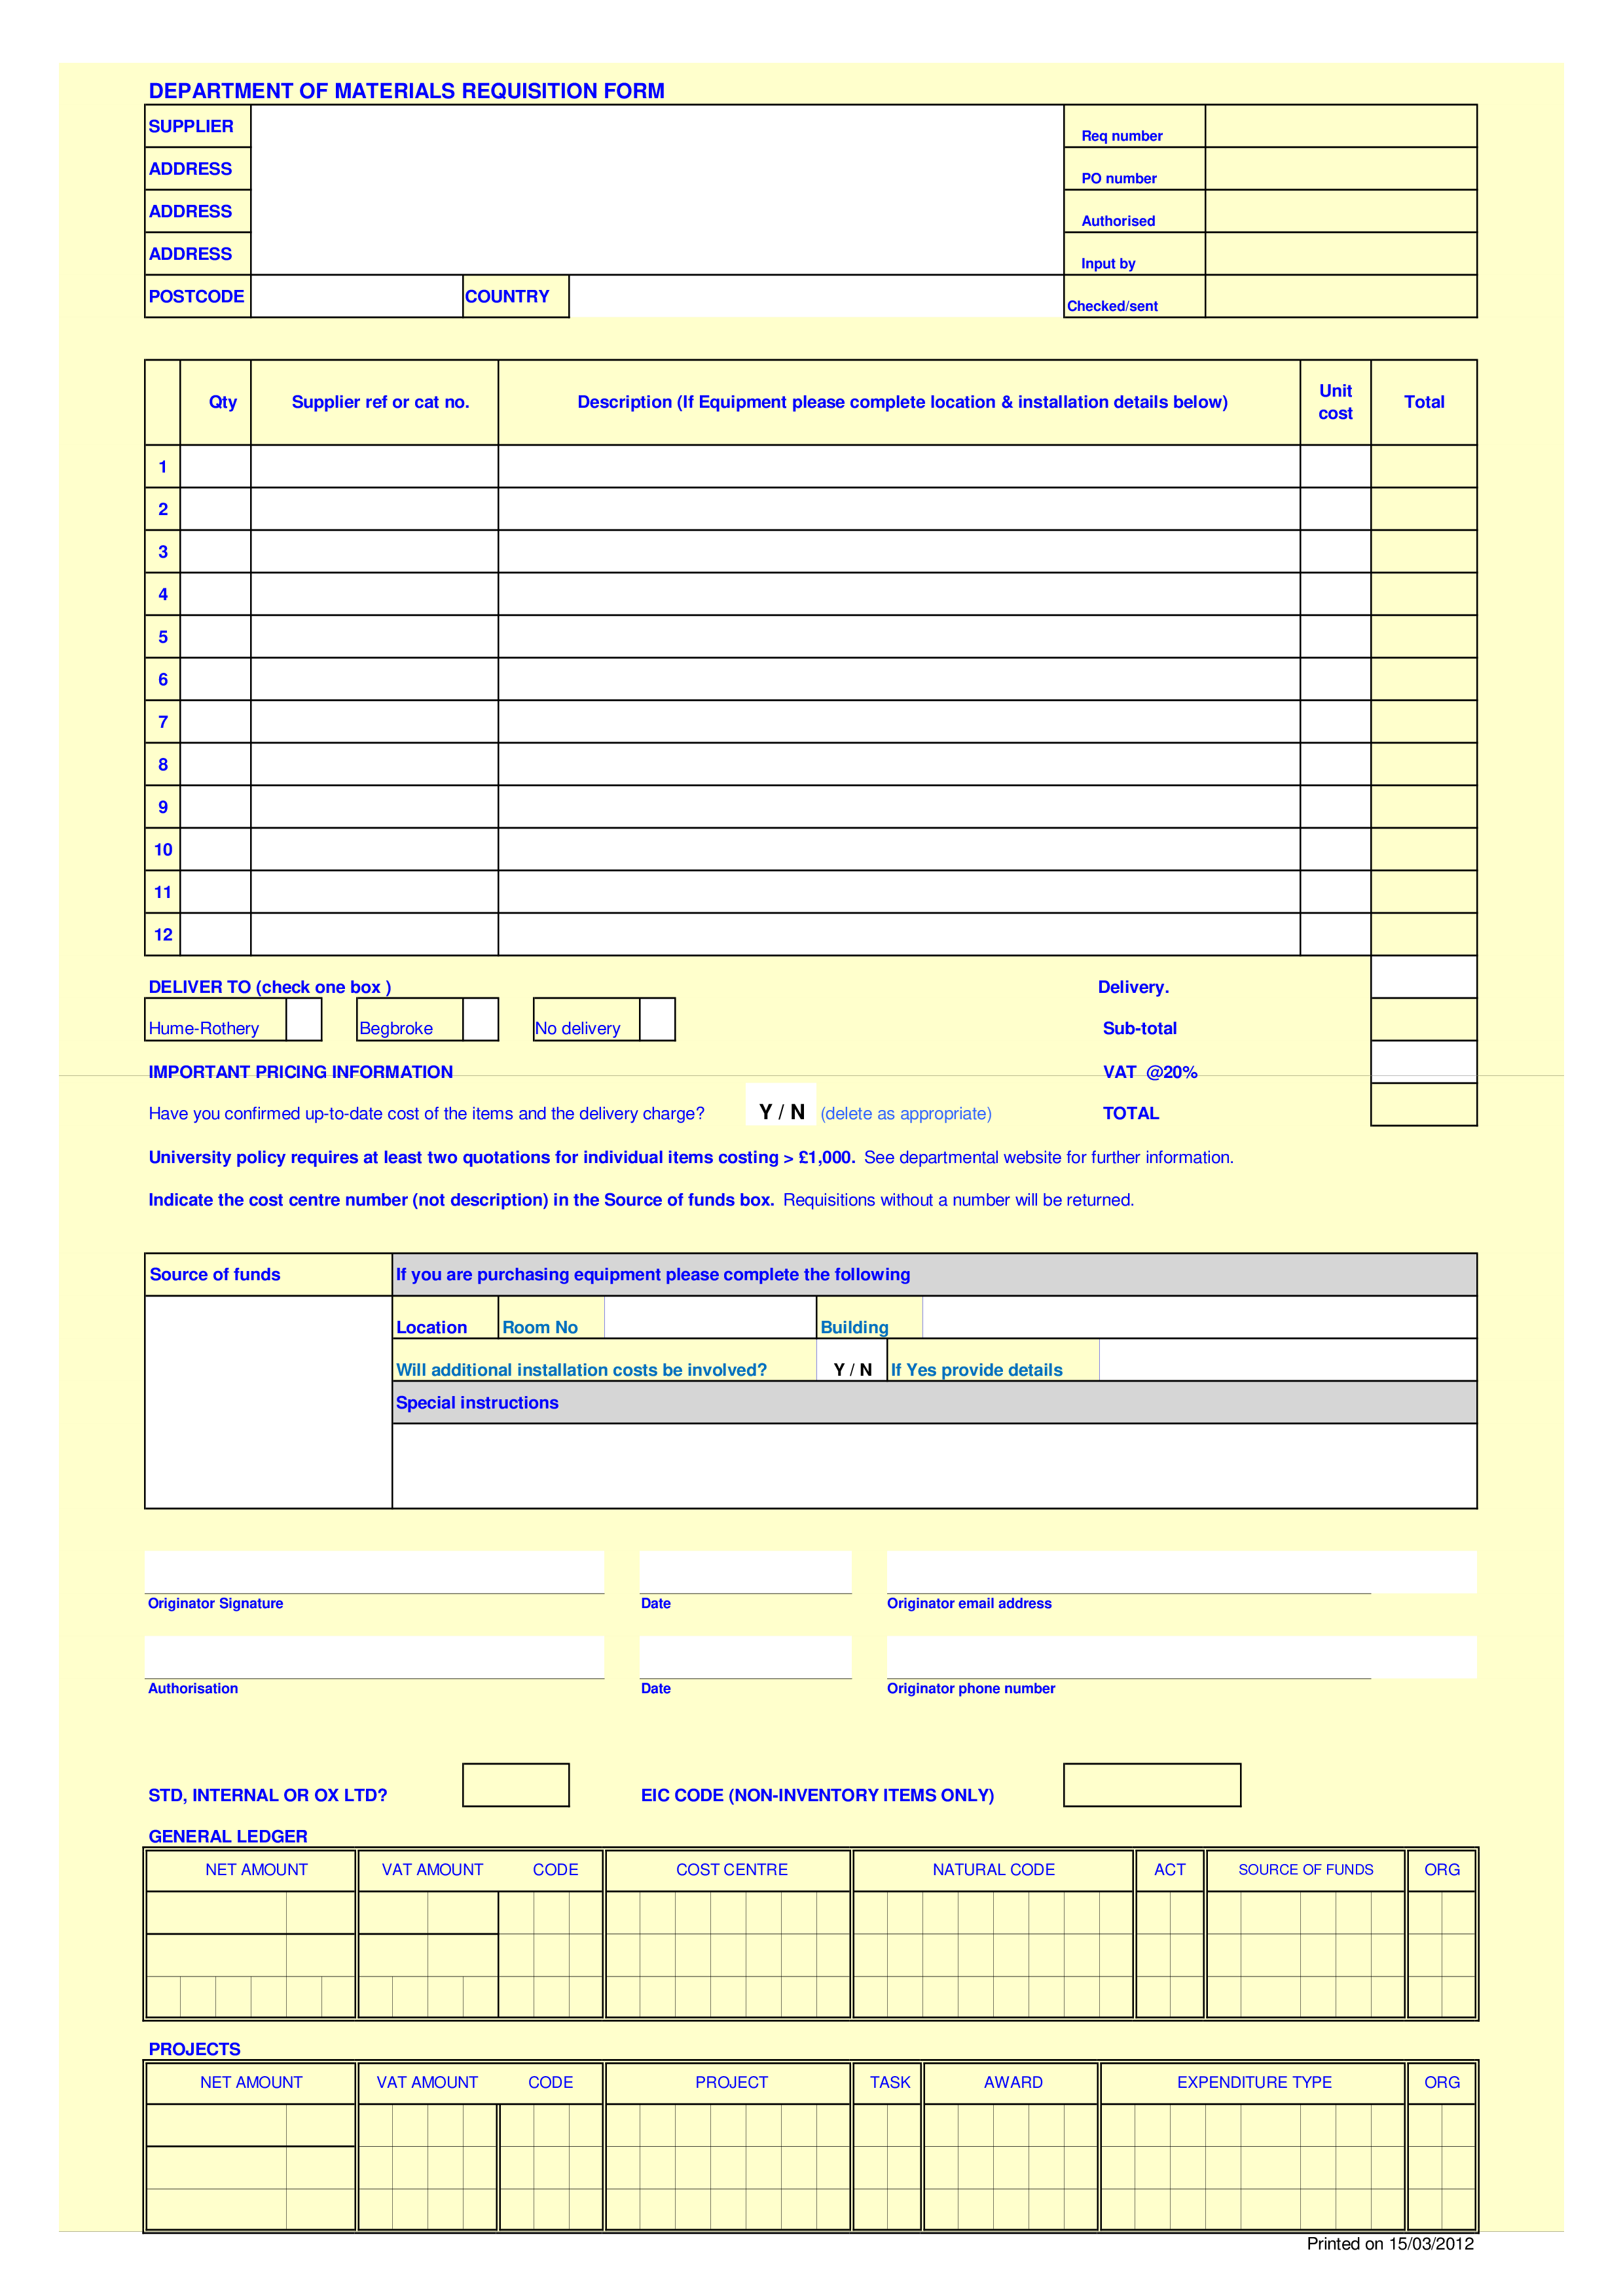 Department Material Requisition Form | Templates at